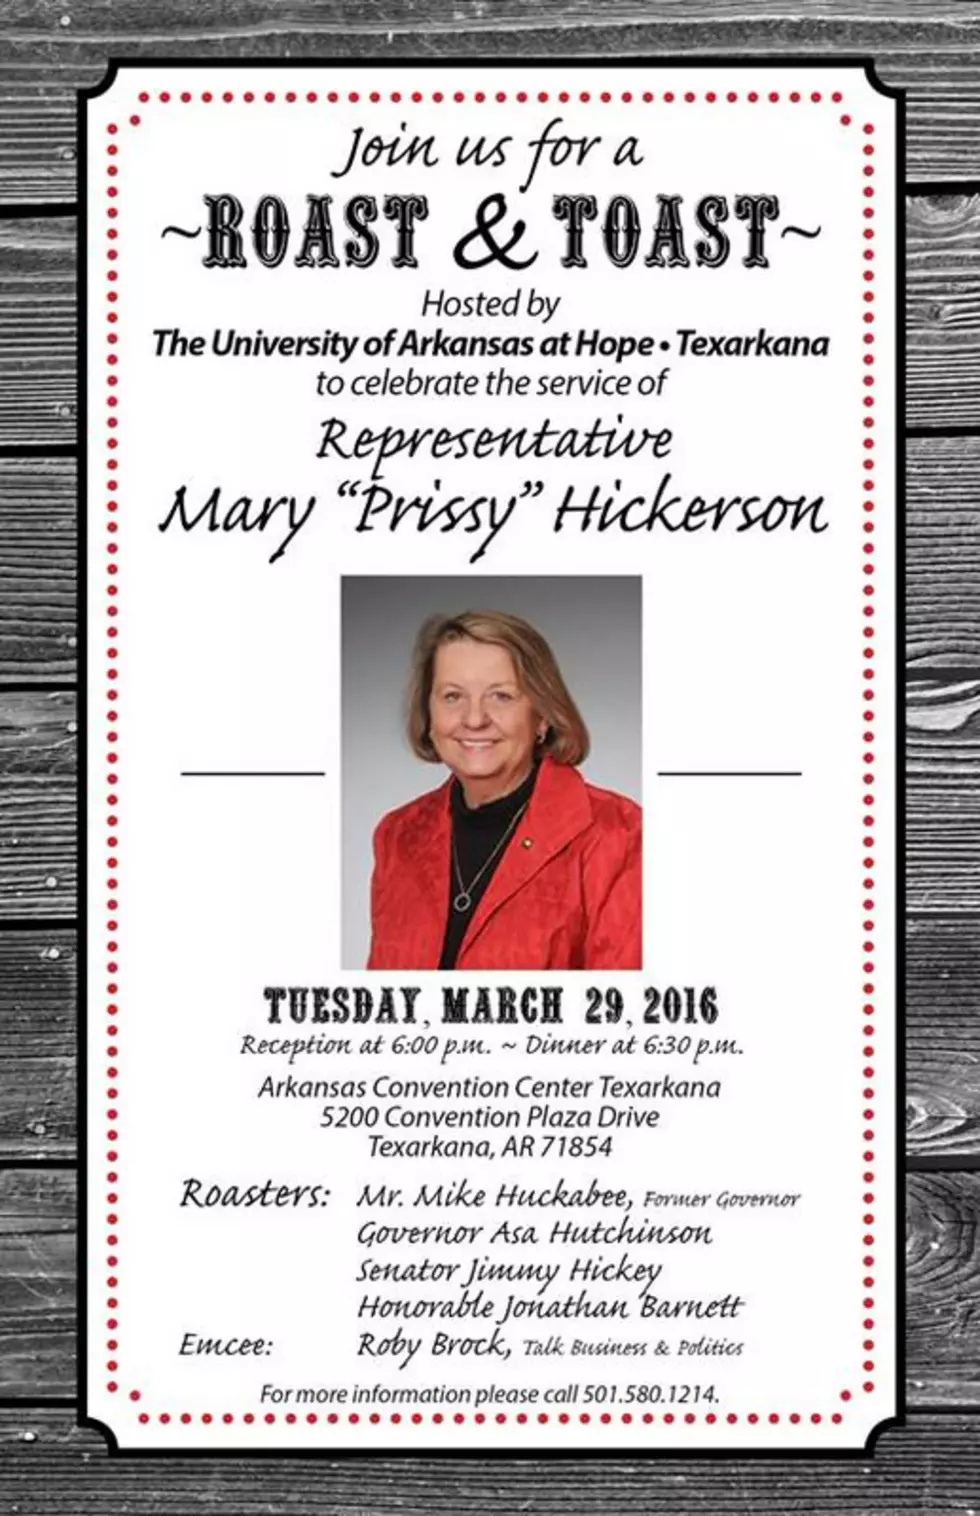 Roast and Toast Celebrates Prissy Hickerson Today